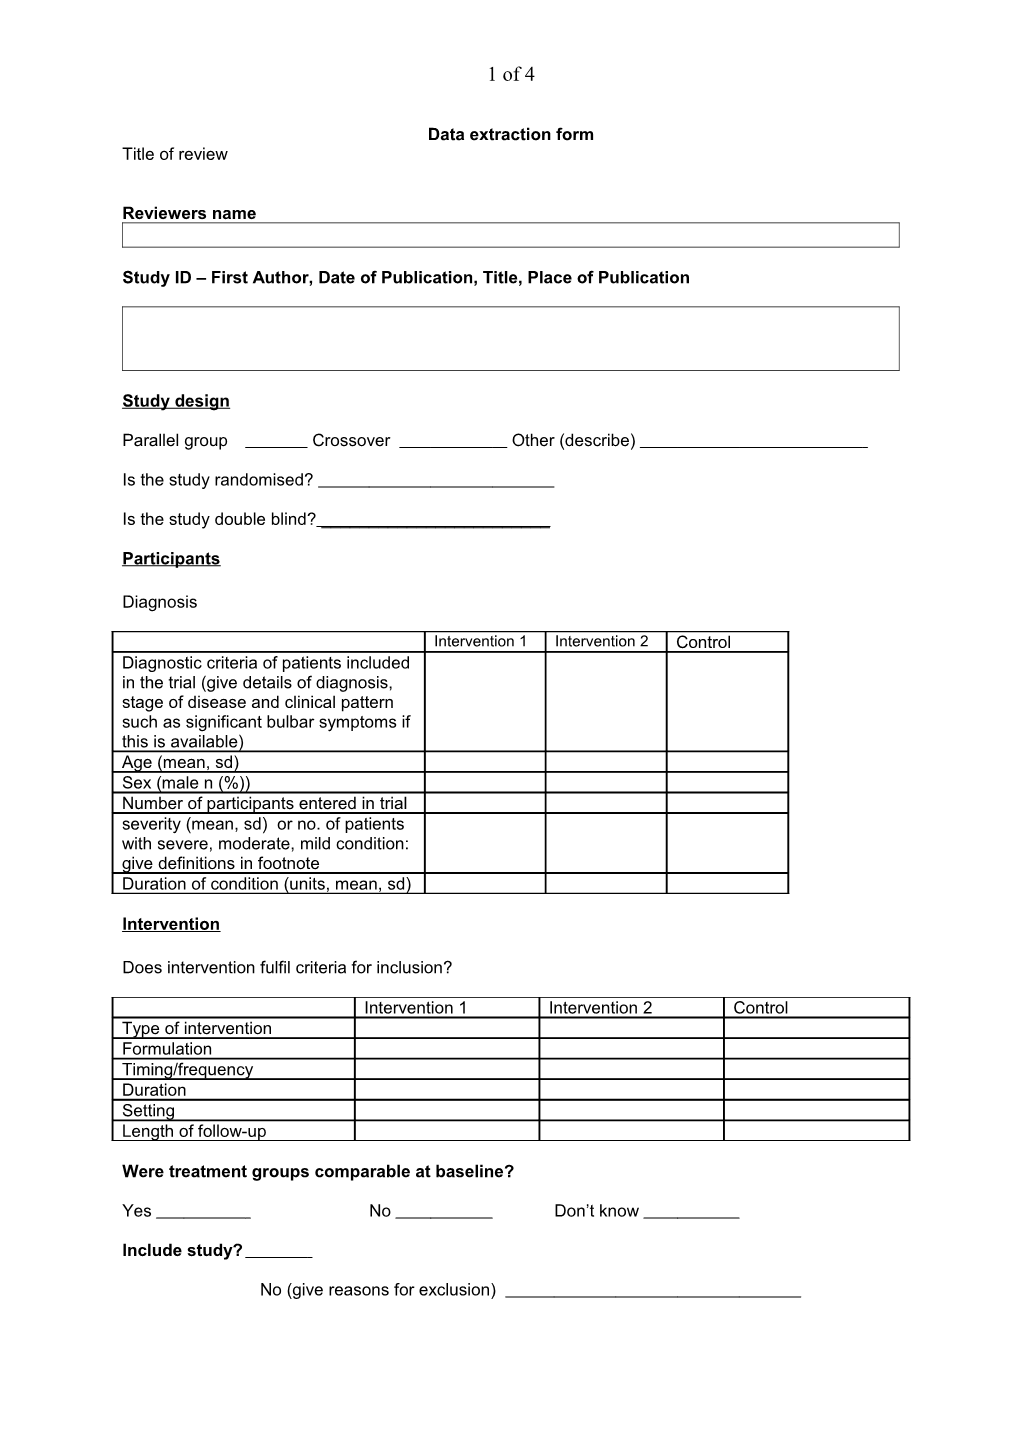 Data Extraction Form